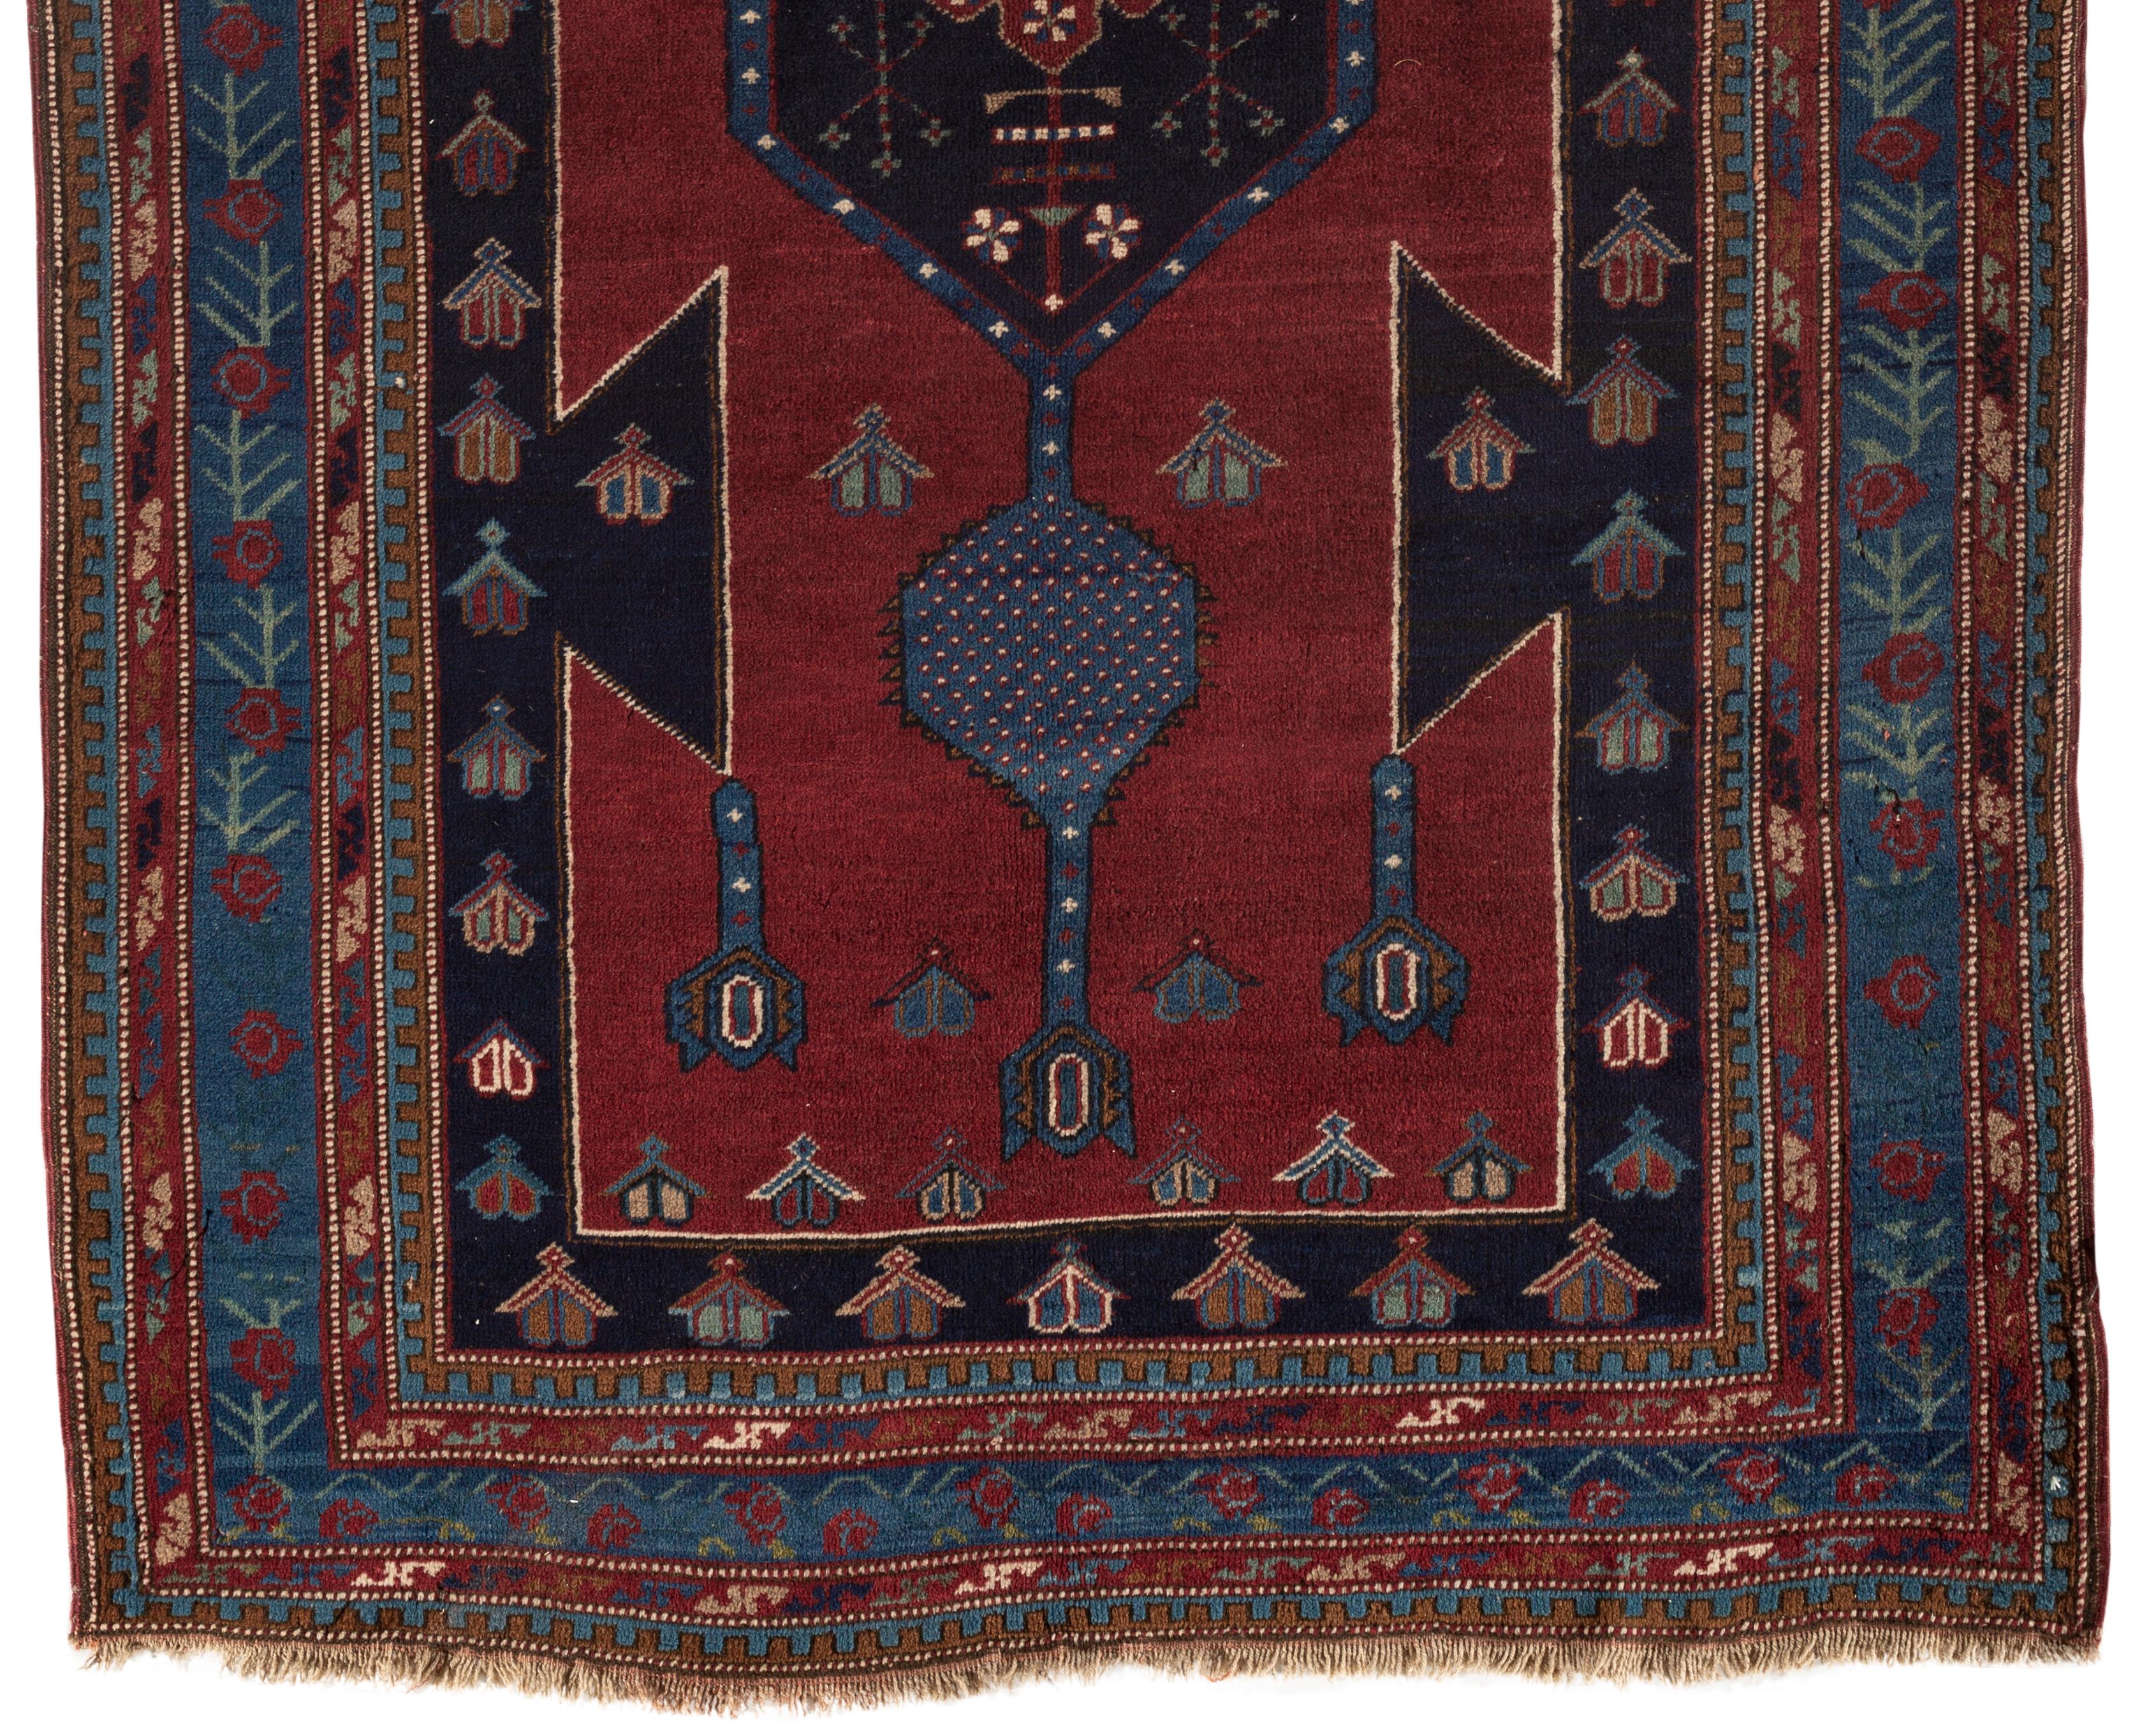 Antique Caucasian Kazak rug, circa 1900. A south west Caucasian Kazak hand woven rug circa 1900. The detail in the design and craftsmanship in the weaving has created a true work of art. The Caucasus Mountains, between Persia and Russia are justly